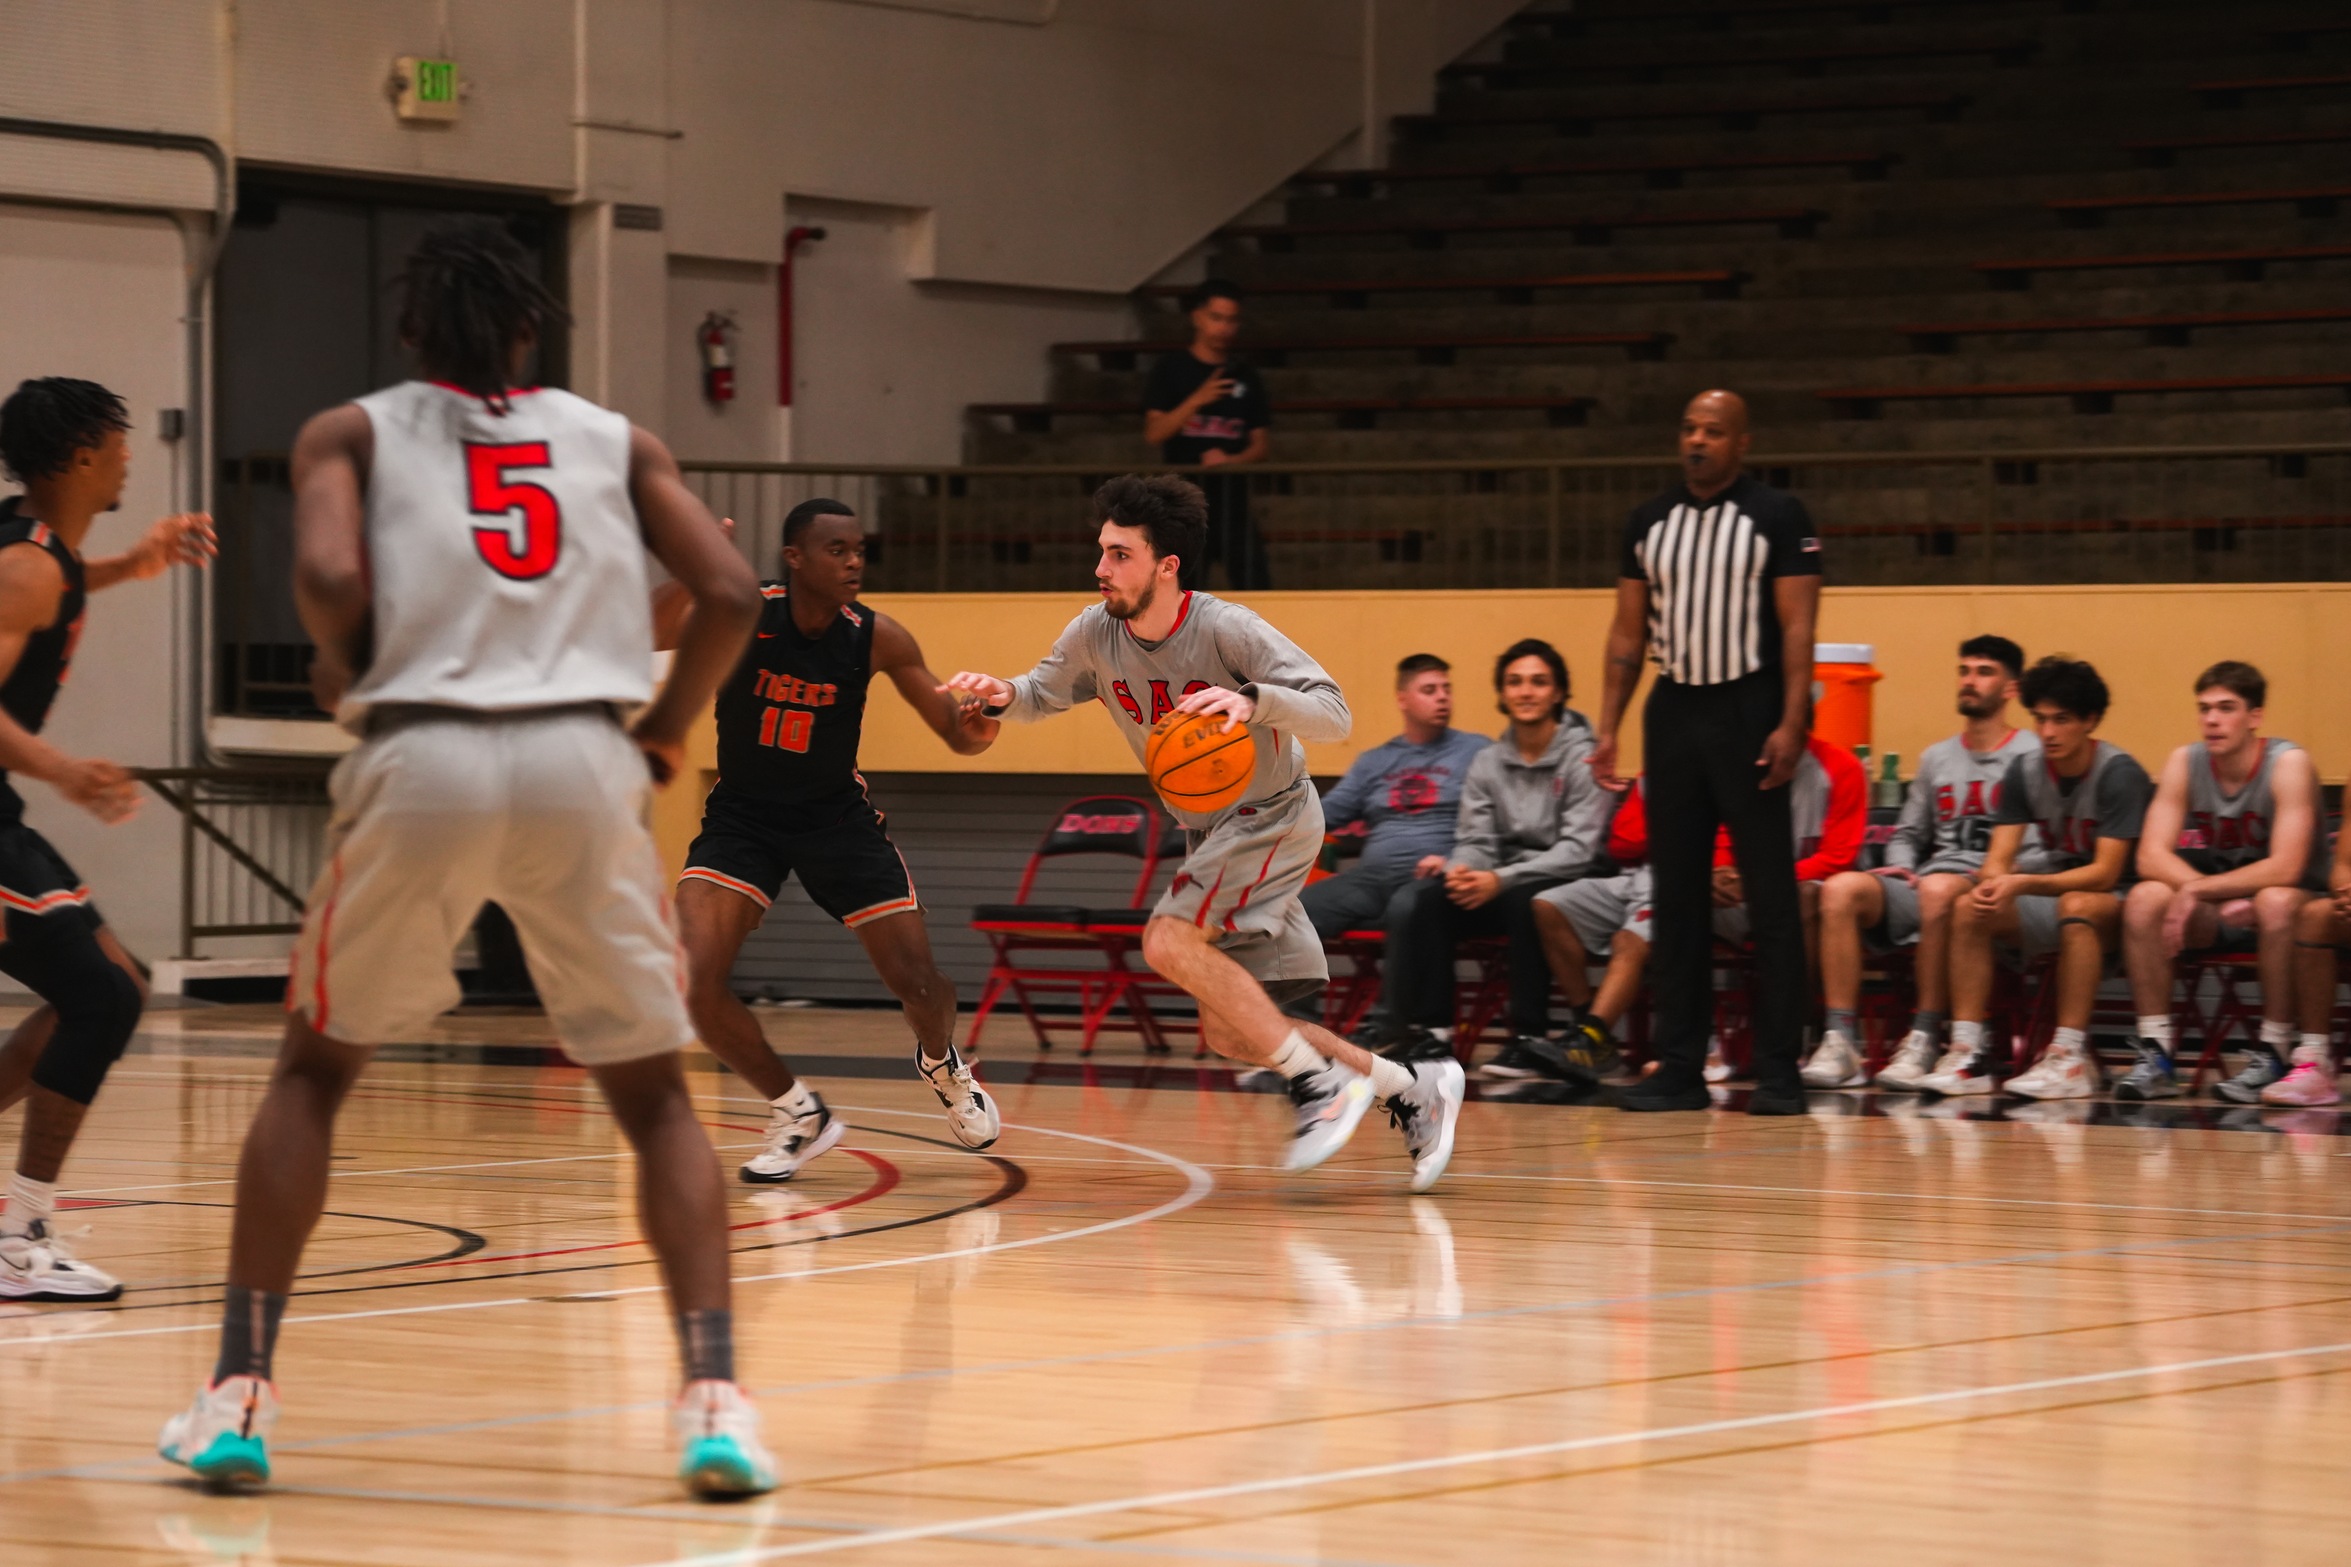 Sulka Drops 22 to Lift SAC to an 81-78 Win Over RCC